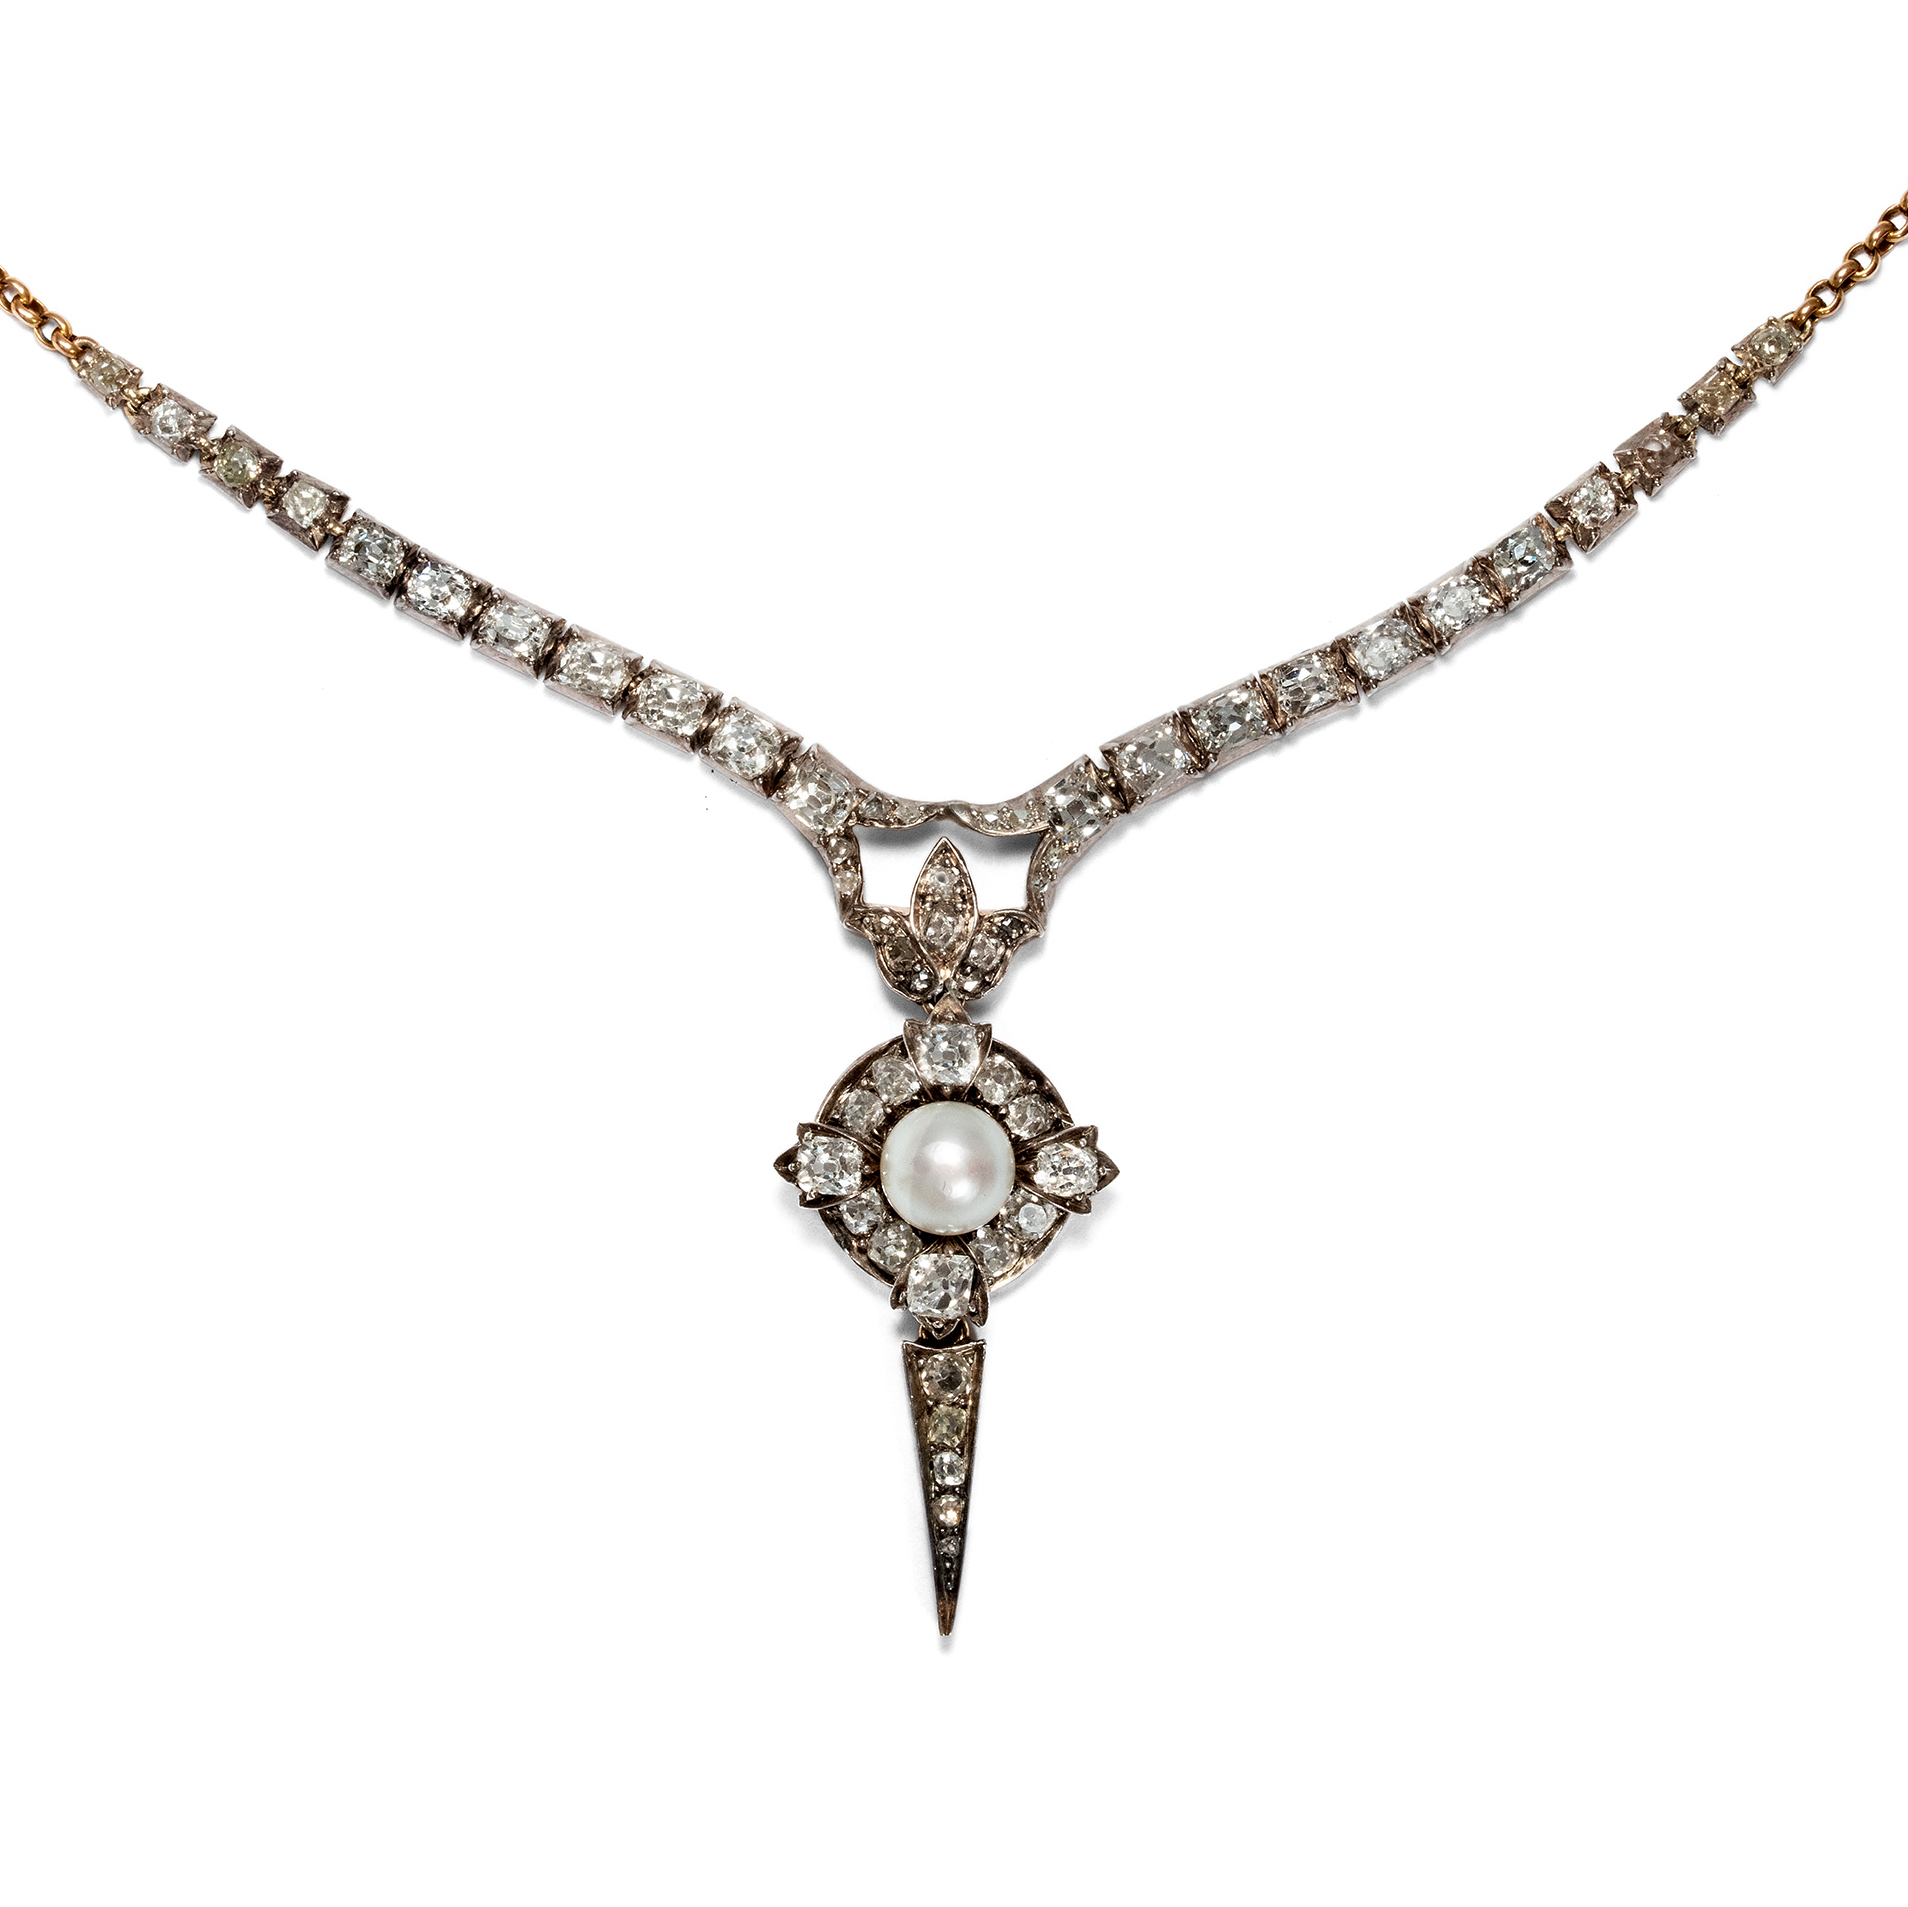 Victorian Necklace With Pearl & 3.34 ct Diamonds, ca. 1870